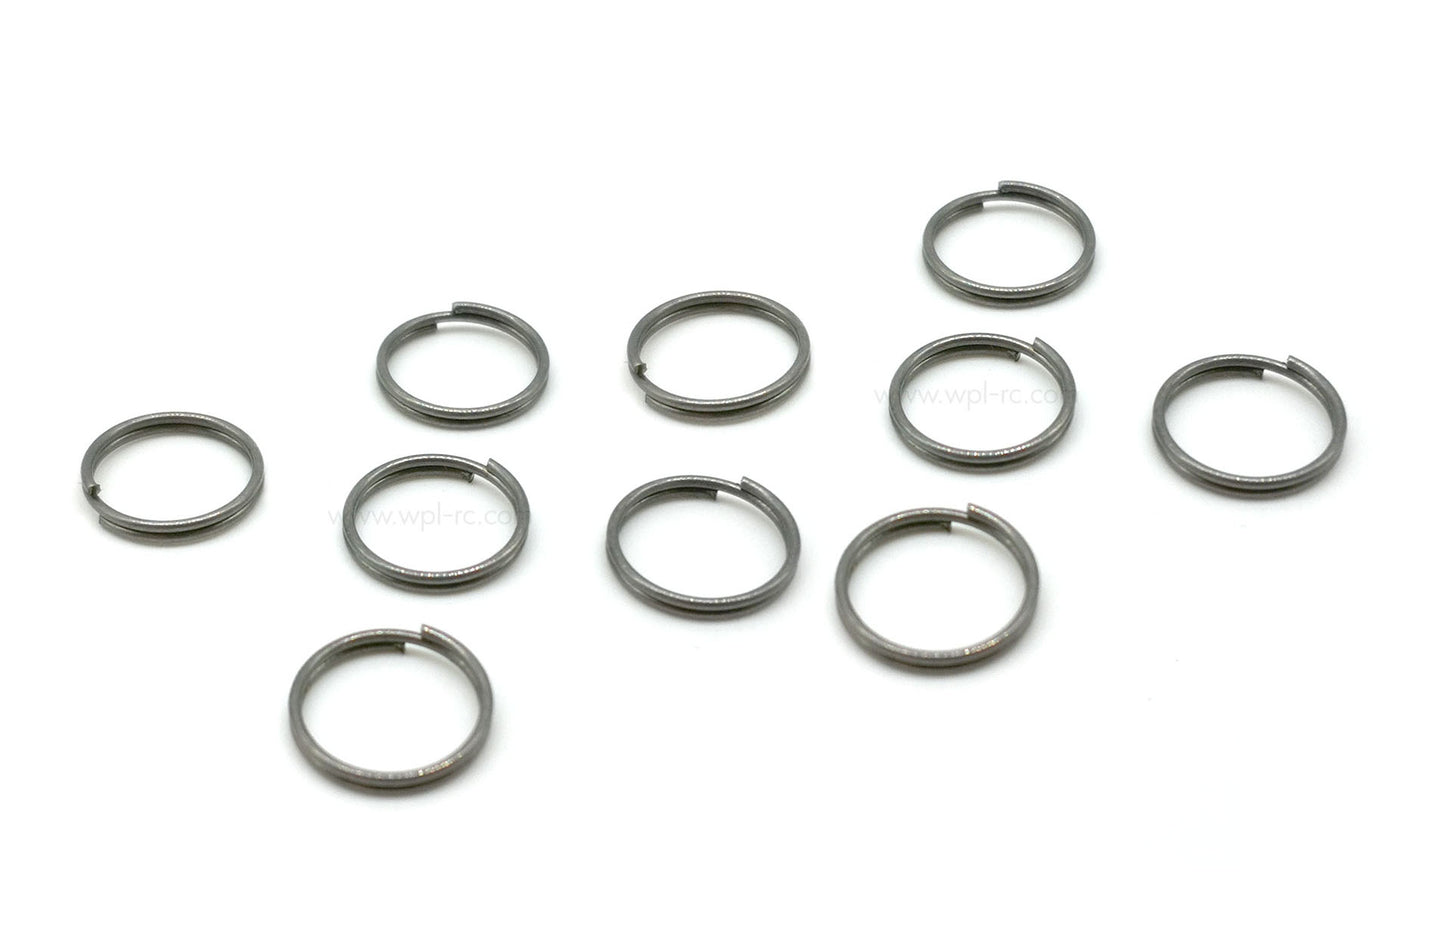 Spring Retainer Ring - 10 pcs - WPL RC Official Store